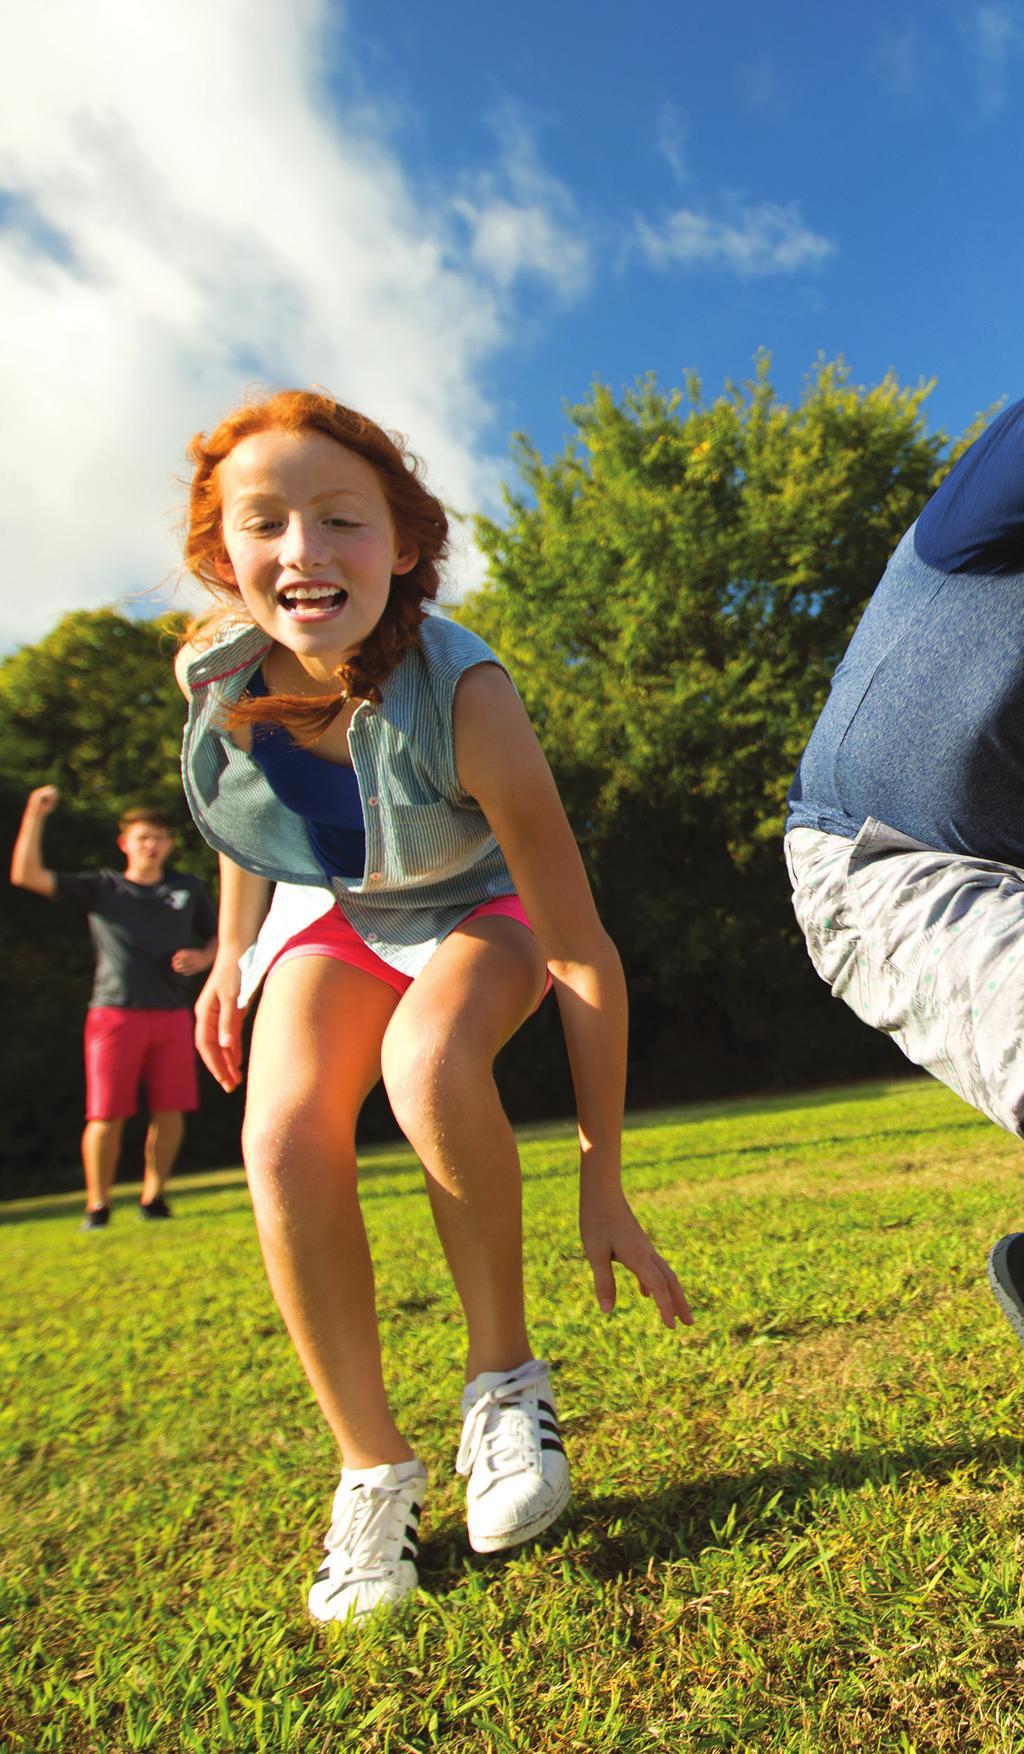 9:30am - 4:00pm The Parkwood YMCA Sports Camps range for ages 5-12. Our sports camps emphasize basic to advanced skill instruction and practice in all areas of the sport.